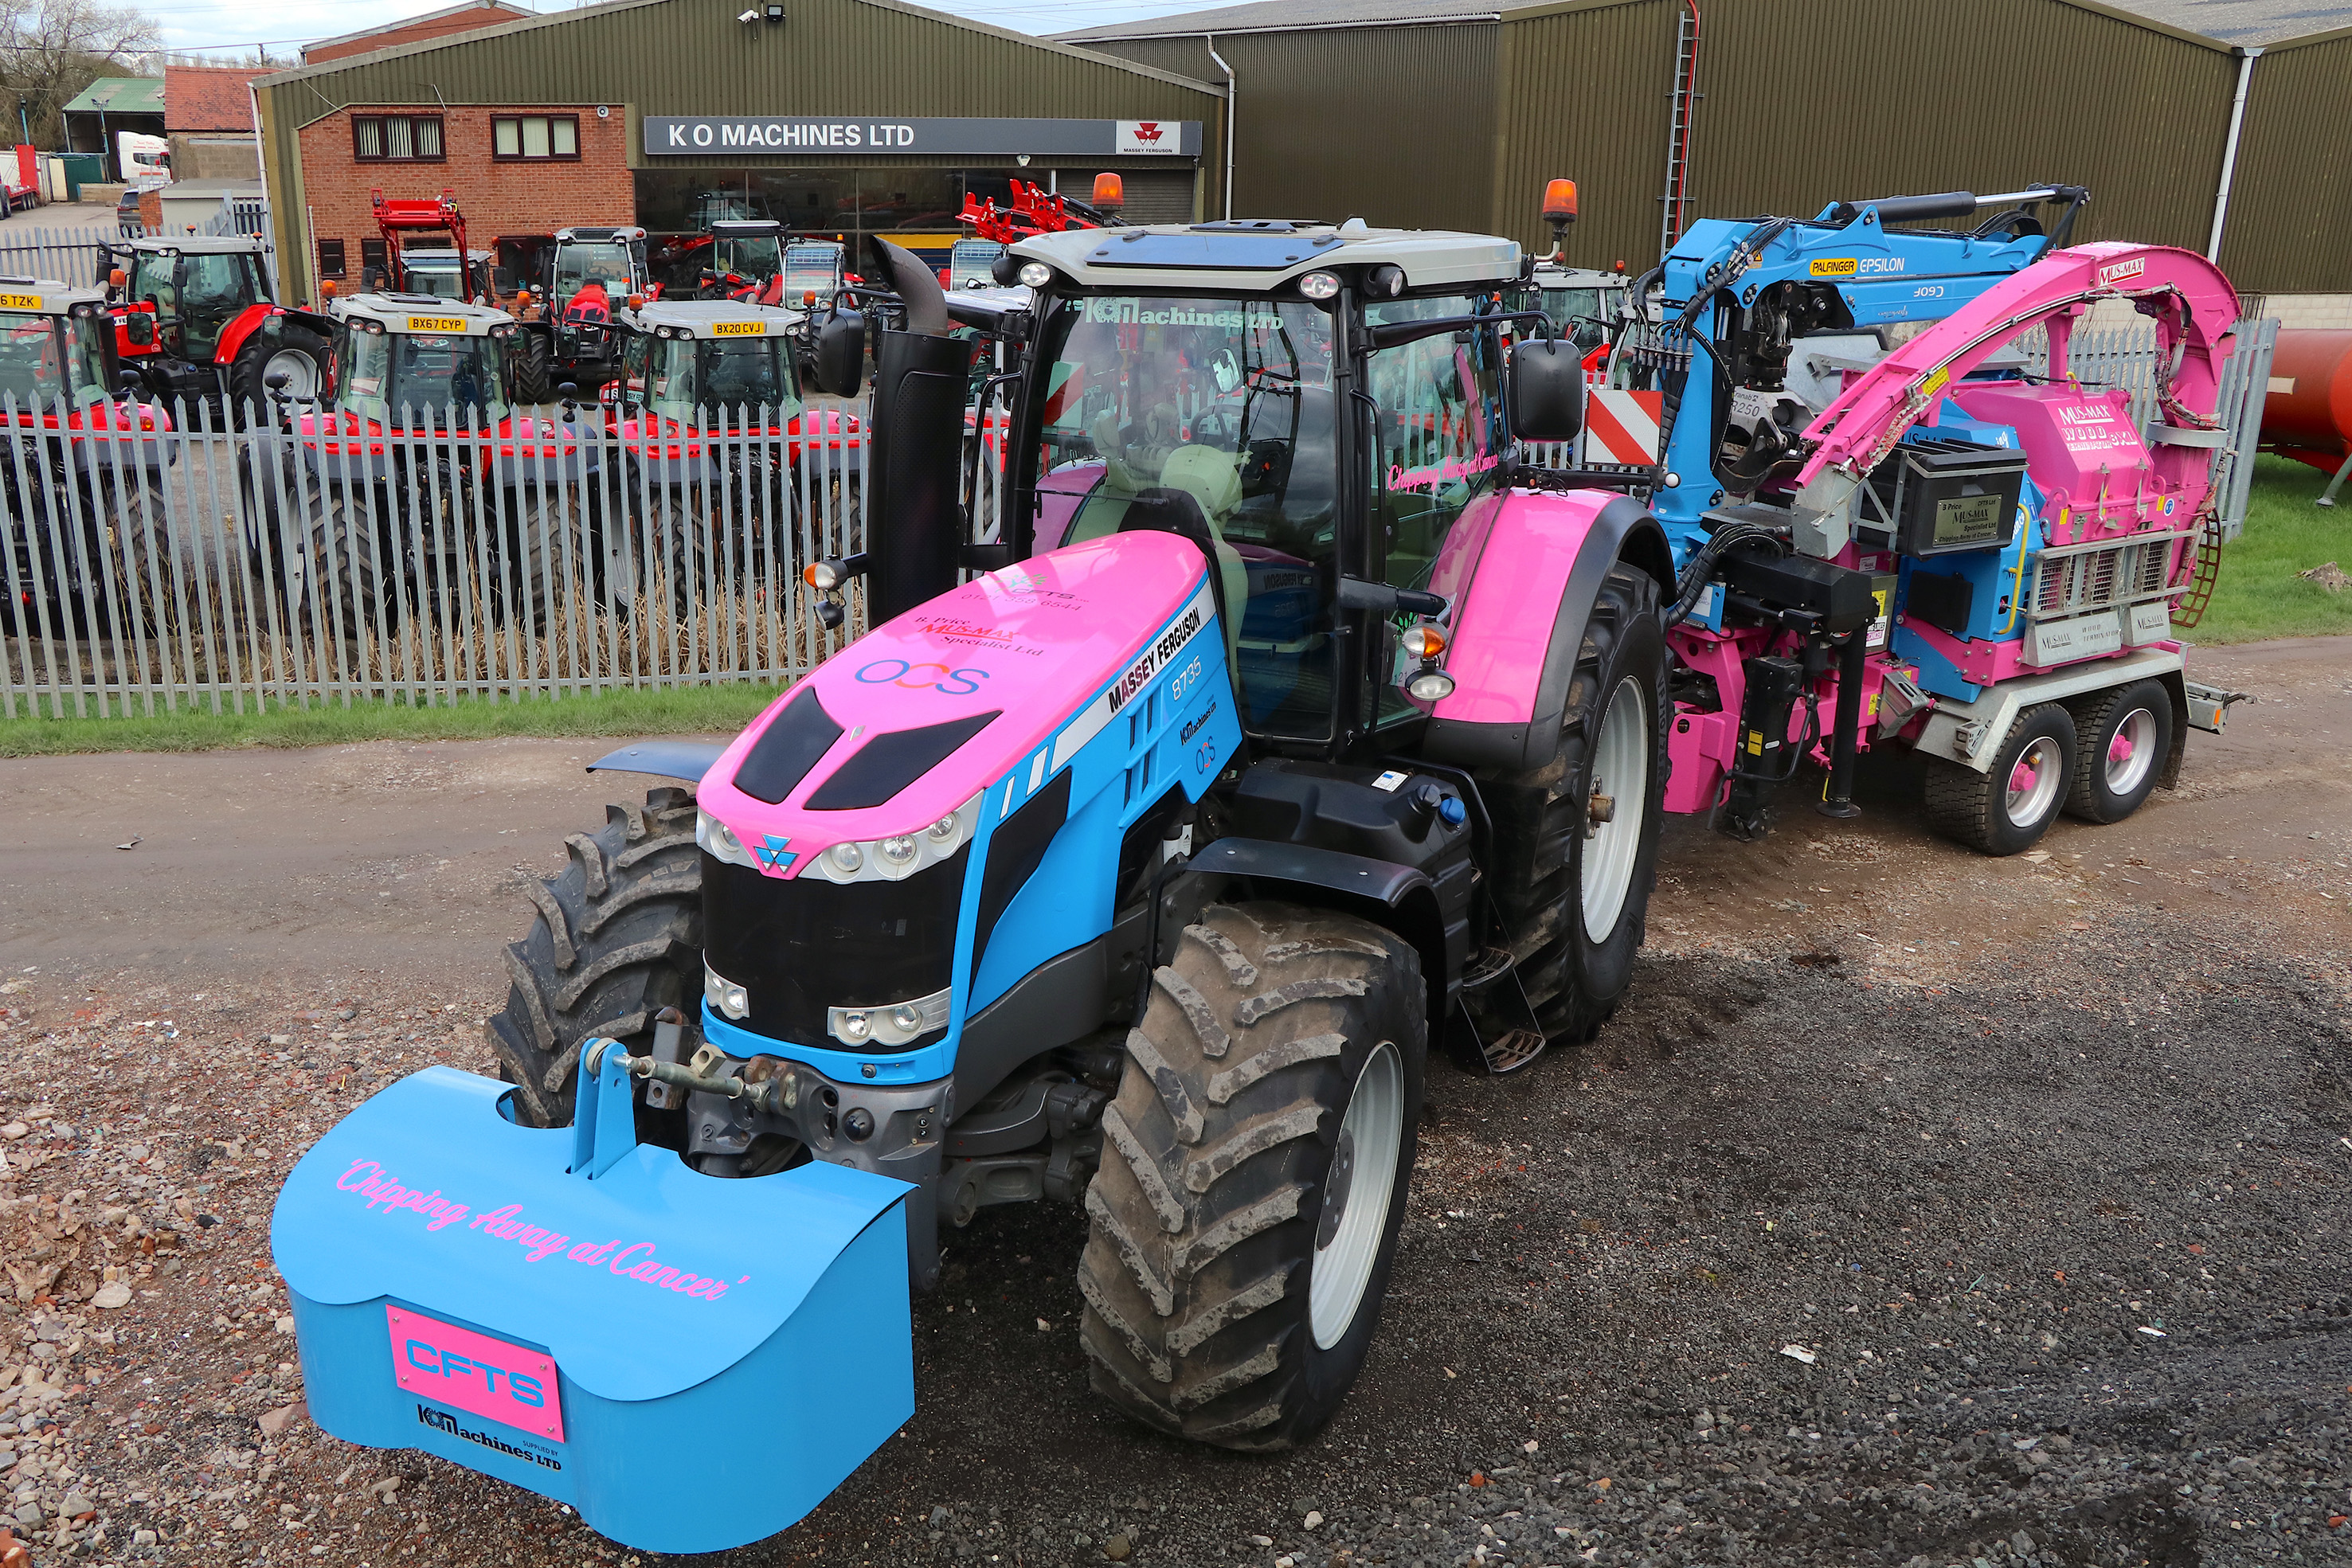 Custom coloured tractor and chipper creates one-off charity outfit